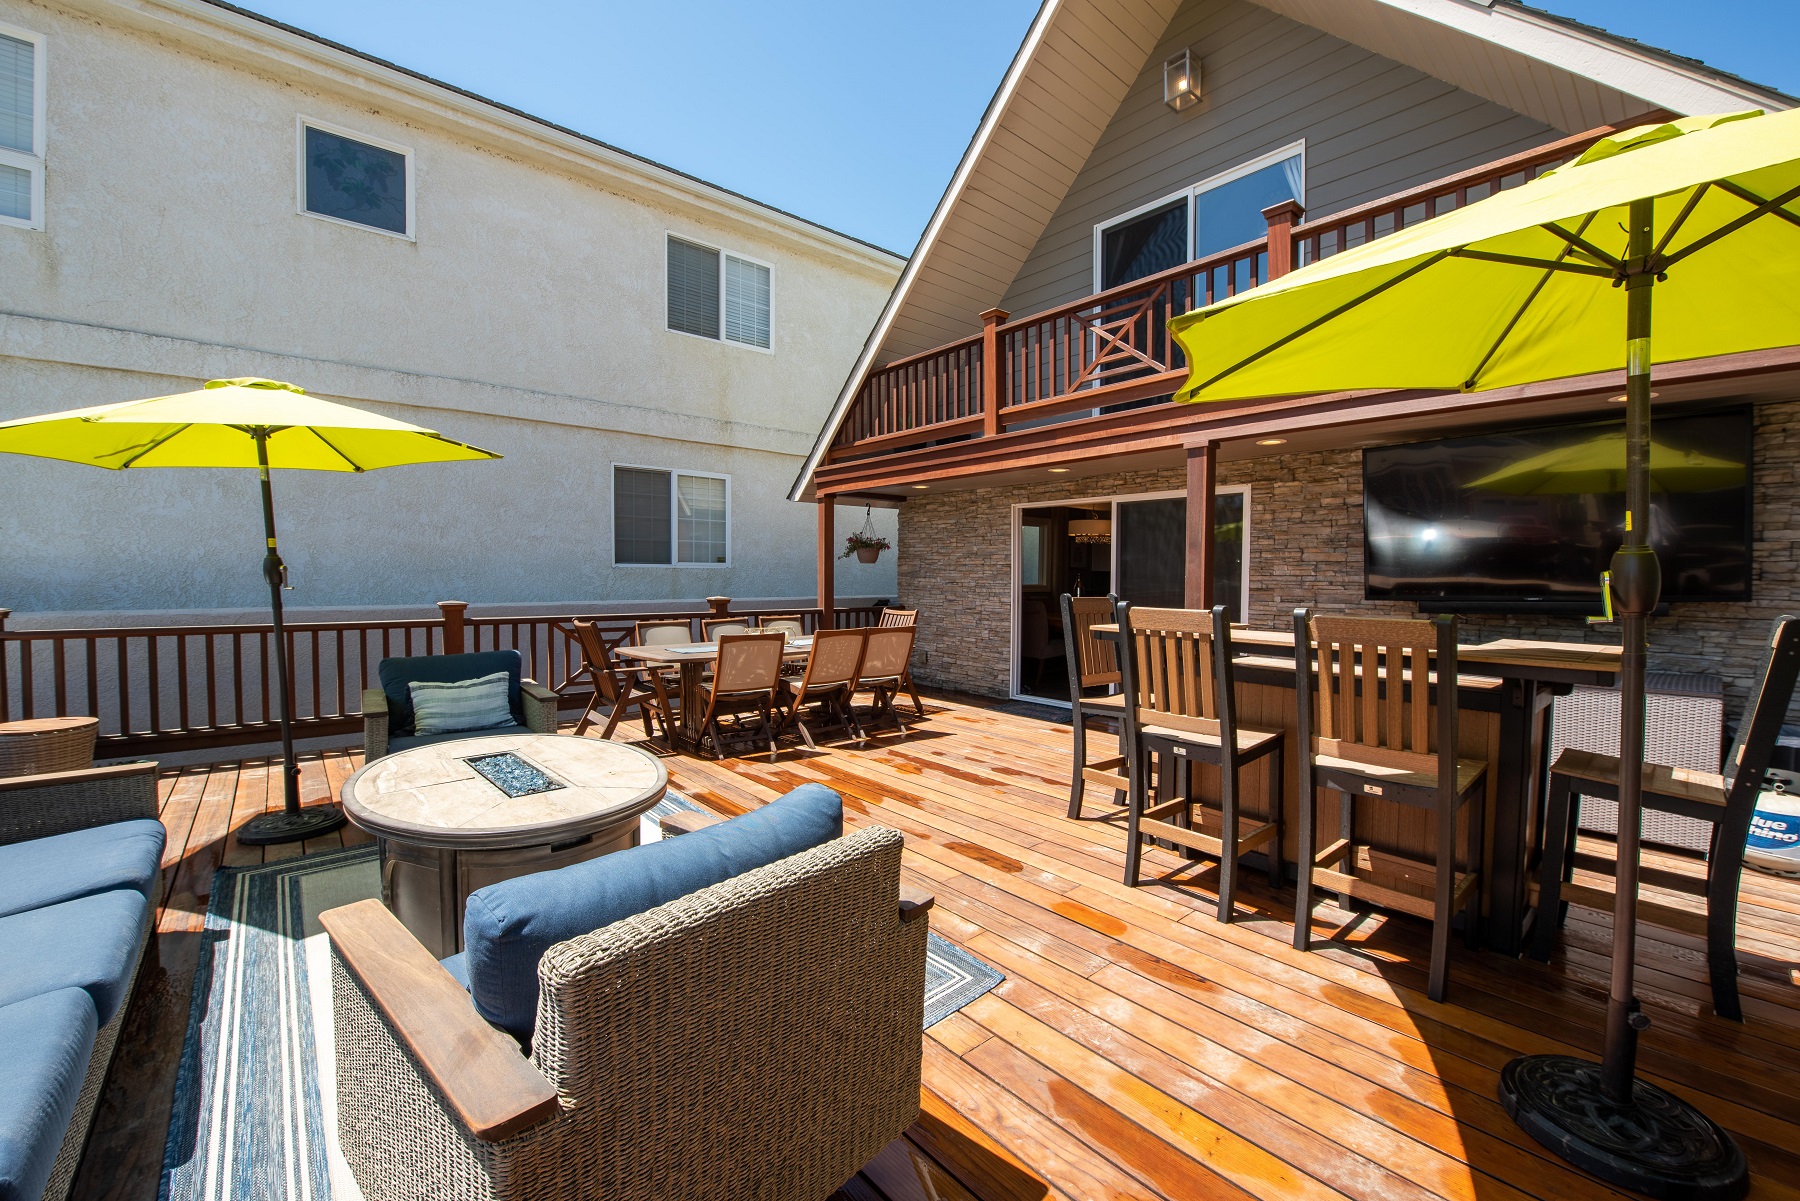 Entertainment deck with Fire pit, bar, dining table with seating for 8 and a hot tub!